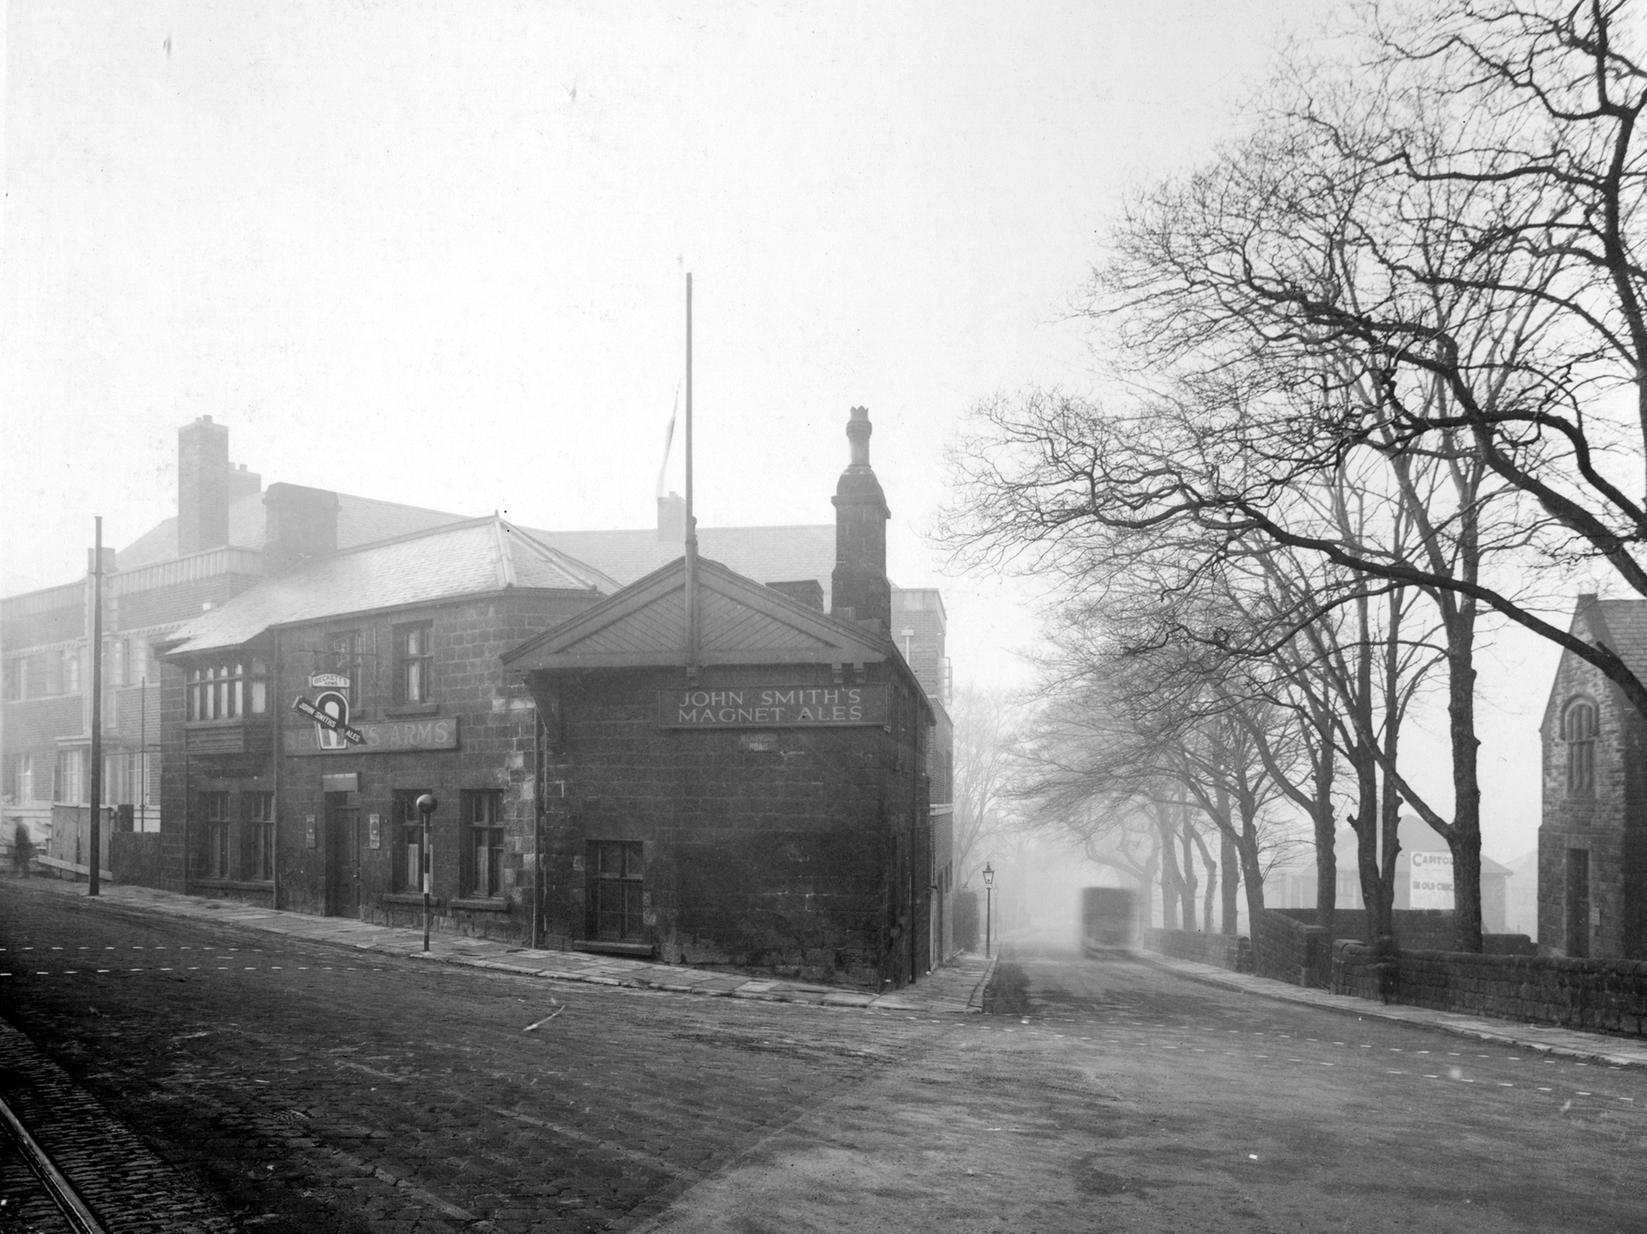 This photo, taken at the junction of Meanwood Road and Monkbridge Road, shows the Beckett's Arms pub with the New Beckett's Arms behind.